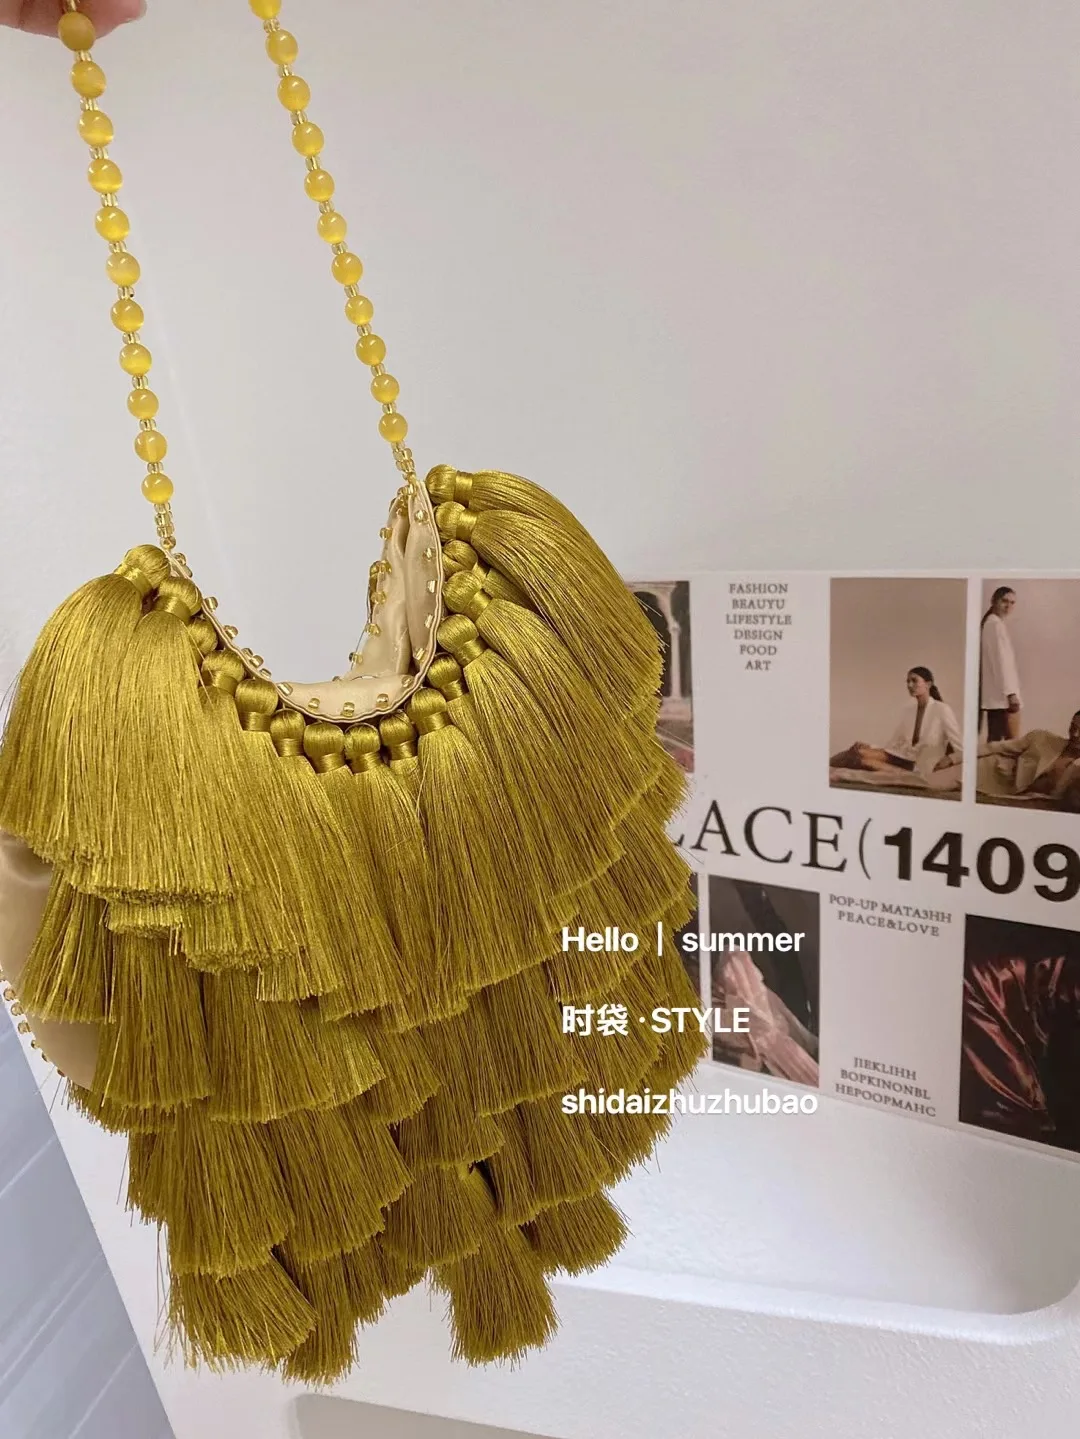 

Fashion Beaded Handbags For Women Handmade Trendy Portable Purse Party Beading Bag Tassel Shoulder Tote Bags With Fringe